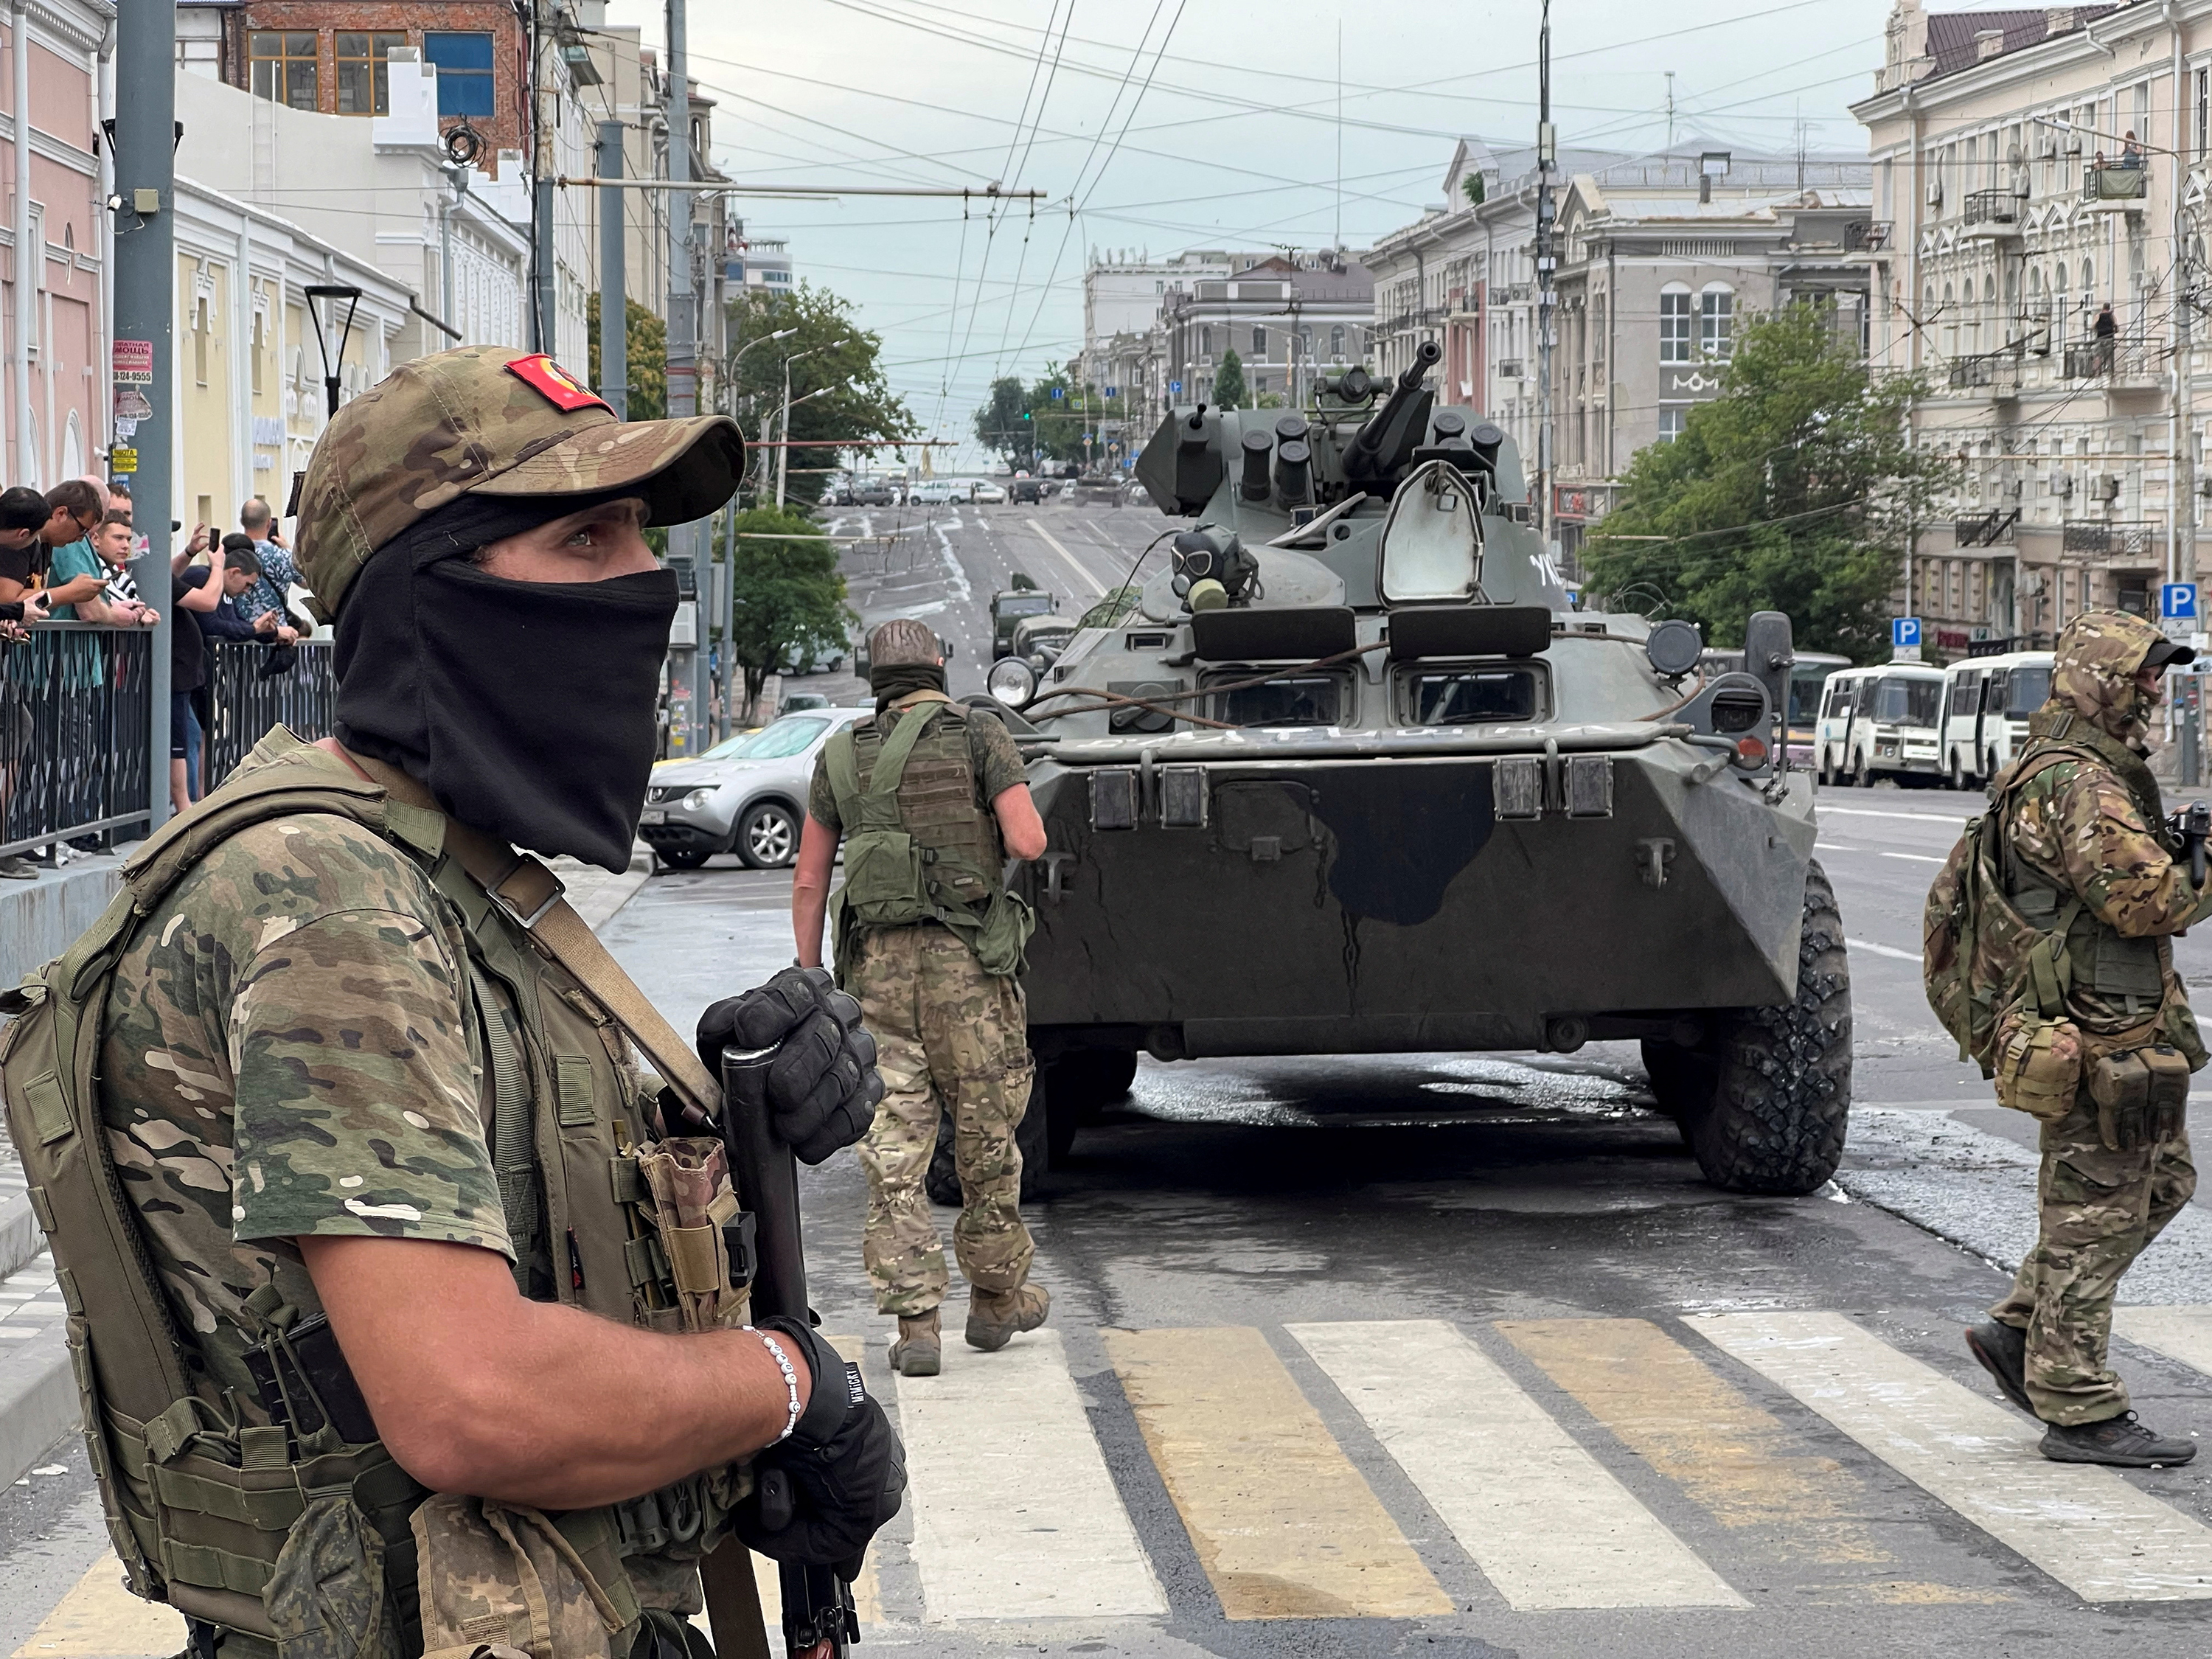 Fighters of Wagner private mercenary group are in Rostov, Russia, on June 24, 